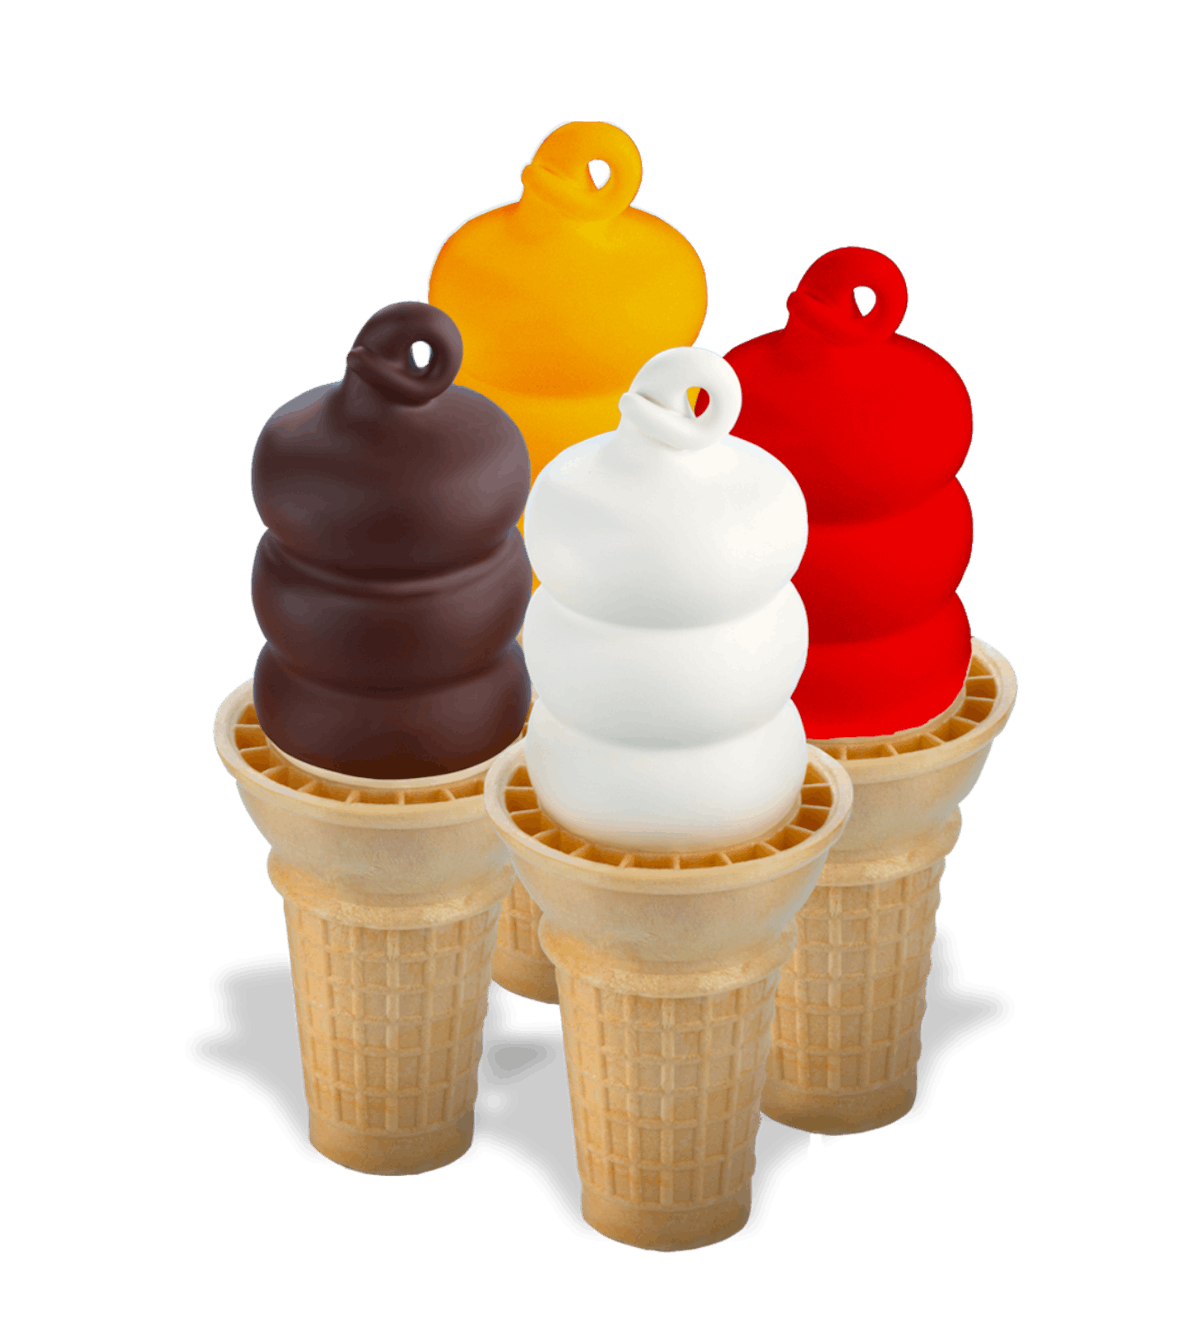 Display Faux Food Prop Dairy Queen Chocolate Dipped Ice Cream New